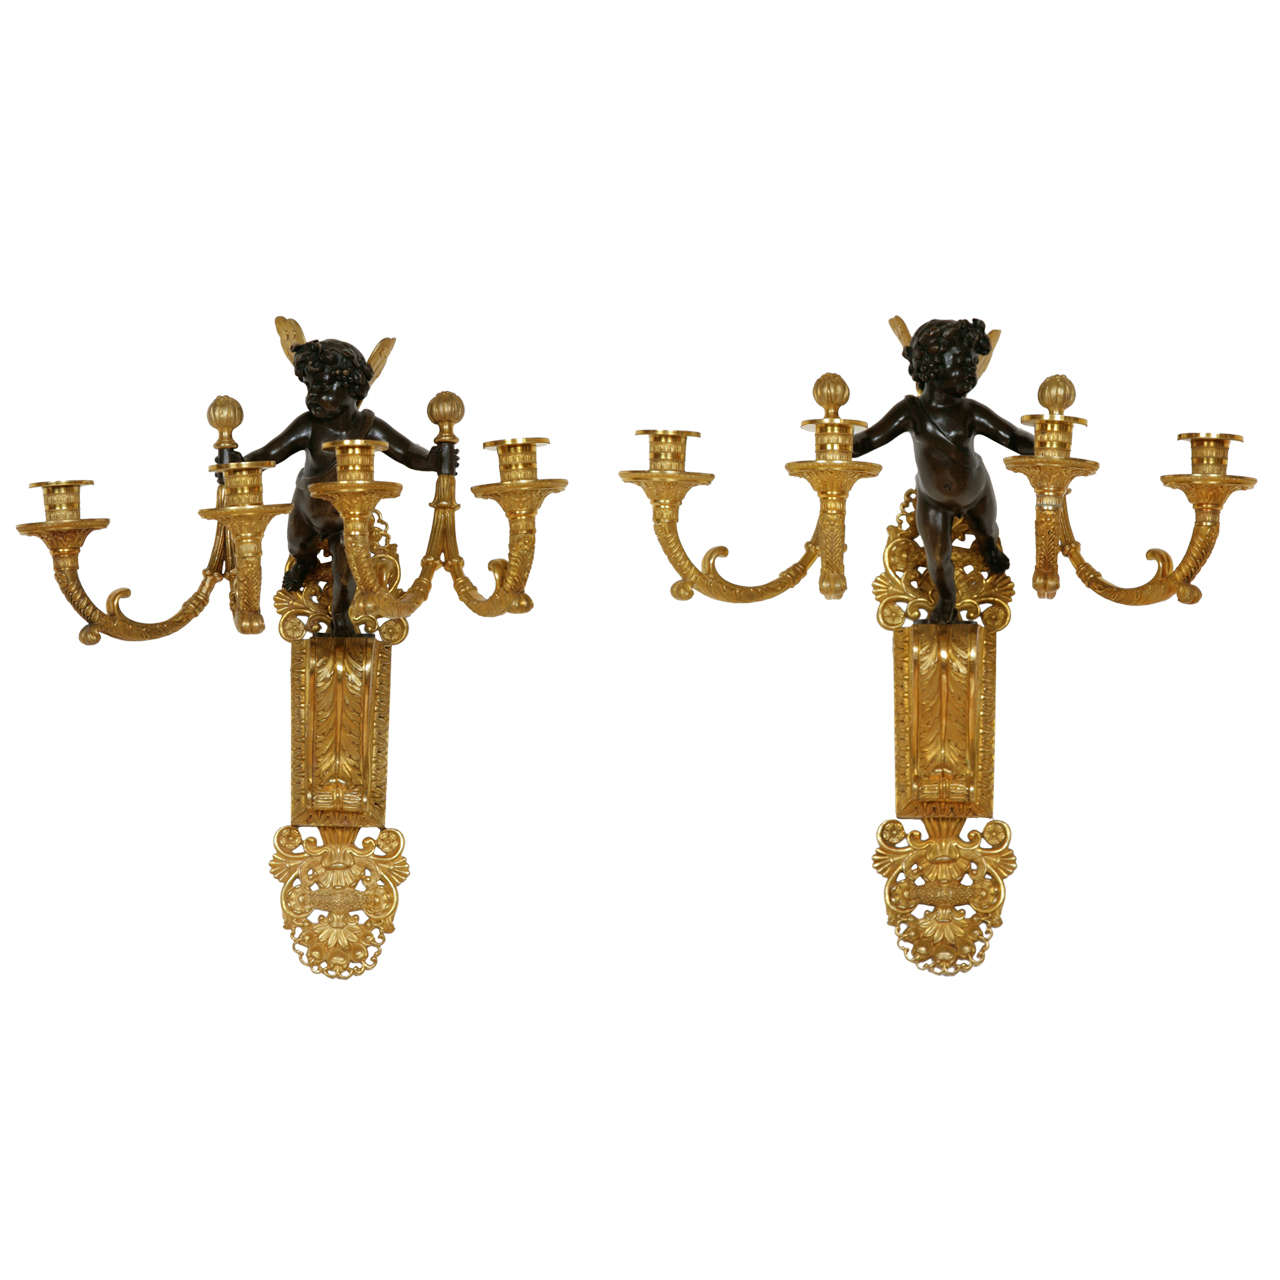 Pair of Restoration Period Gilt and Patinated Bronze Wall Lights